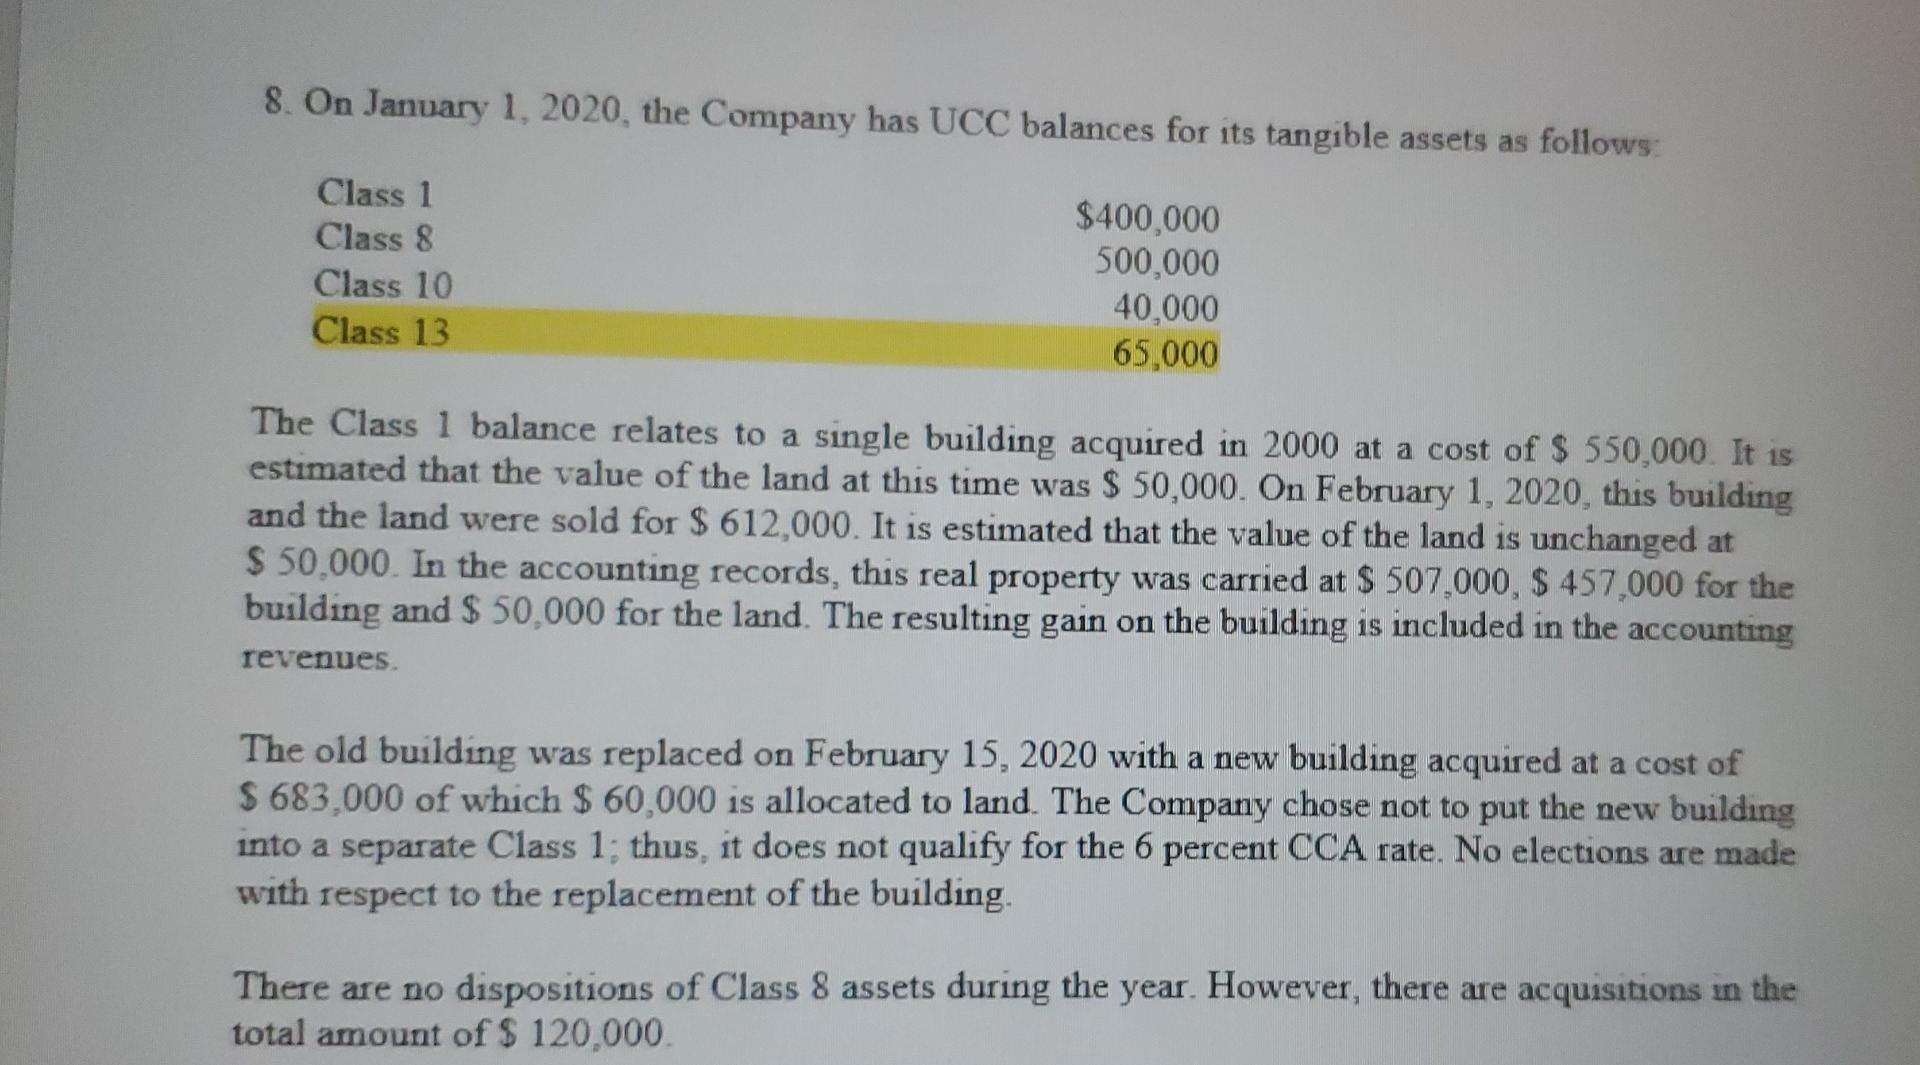 8. On January 1, 2020, the Company has UCC balances for its tangible assets as follows: Class 1 Class 8 Class 10 Class 13 $40